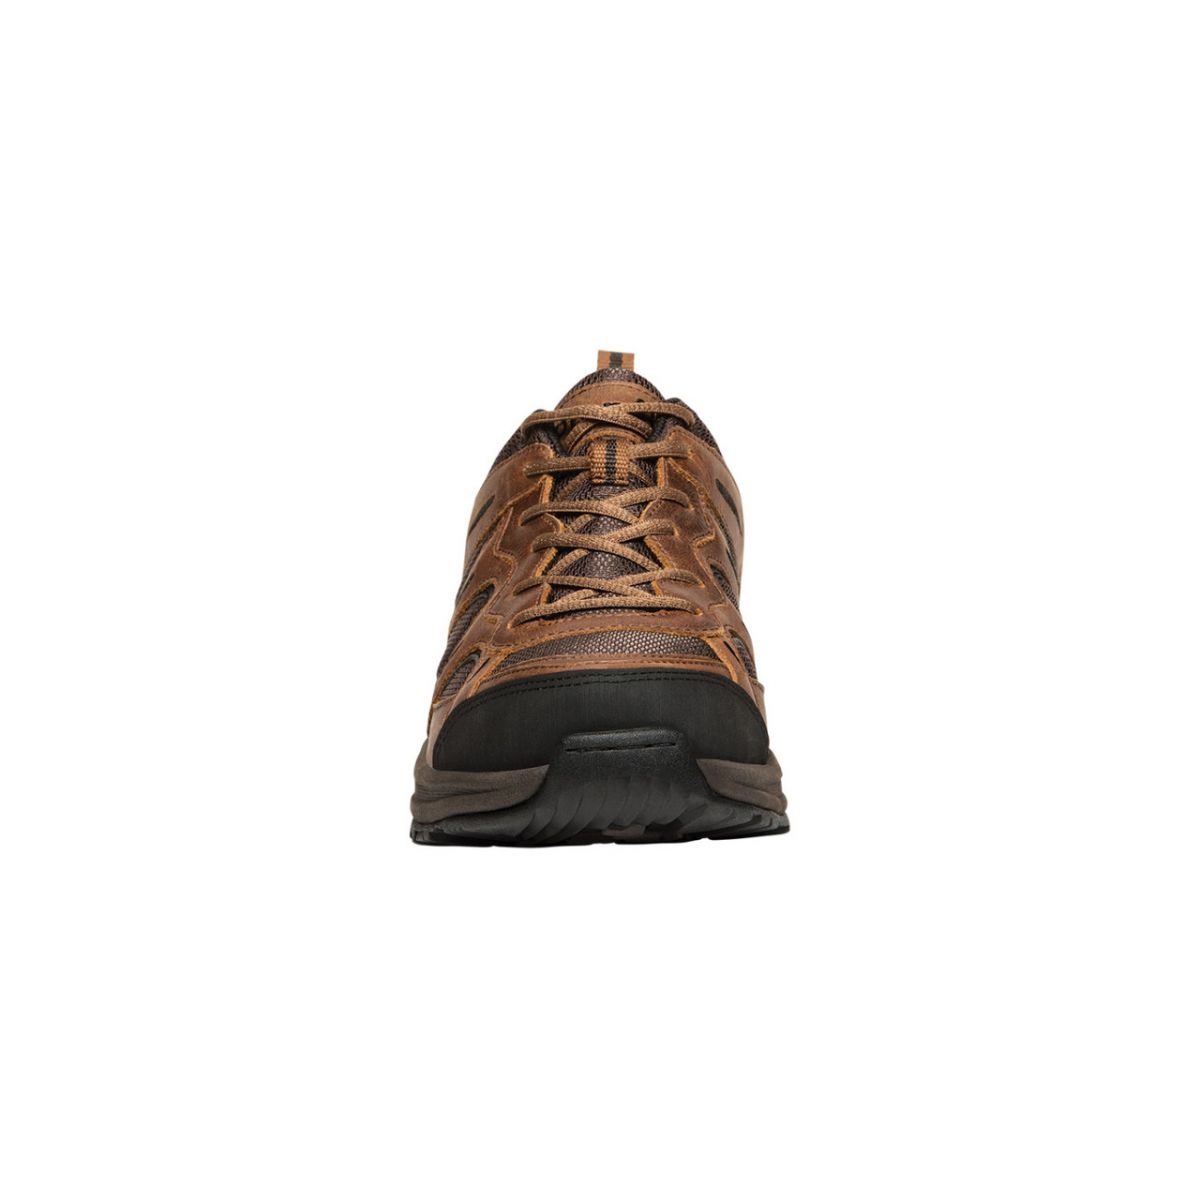 Propet Men's Connelly Hiking Shoe Brown - M5503BR BROWN - BROWN, 7.5